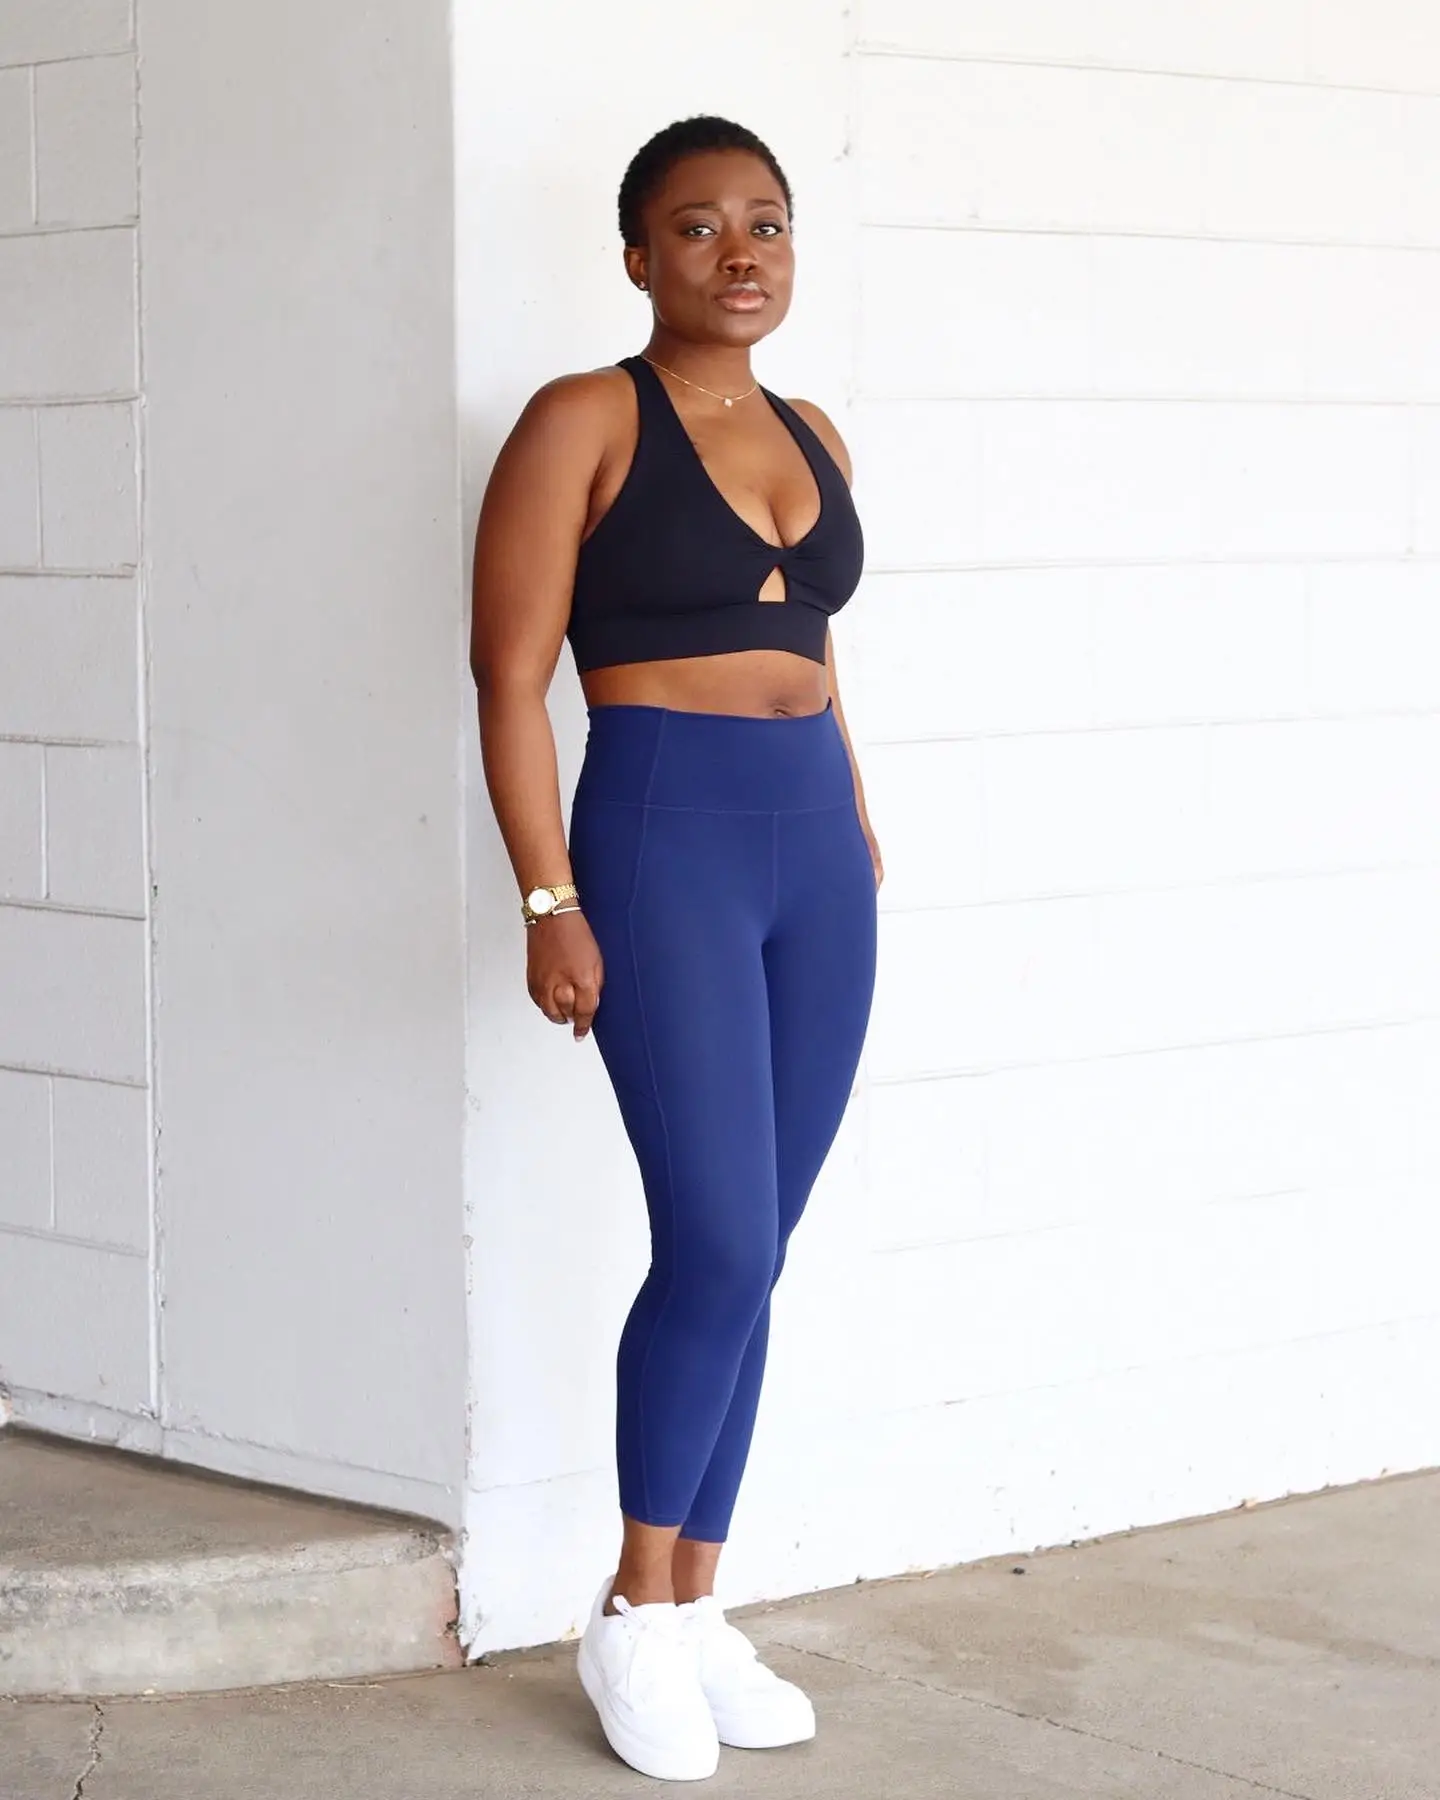 Never met a set from Fabletics I didn't like, Gallery posted by Abena  Antwiwaa